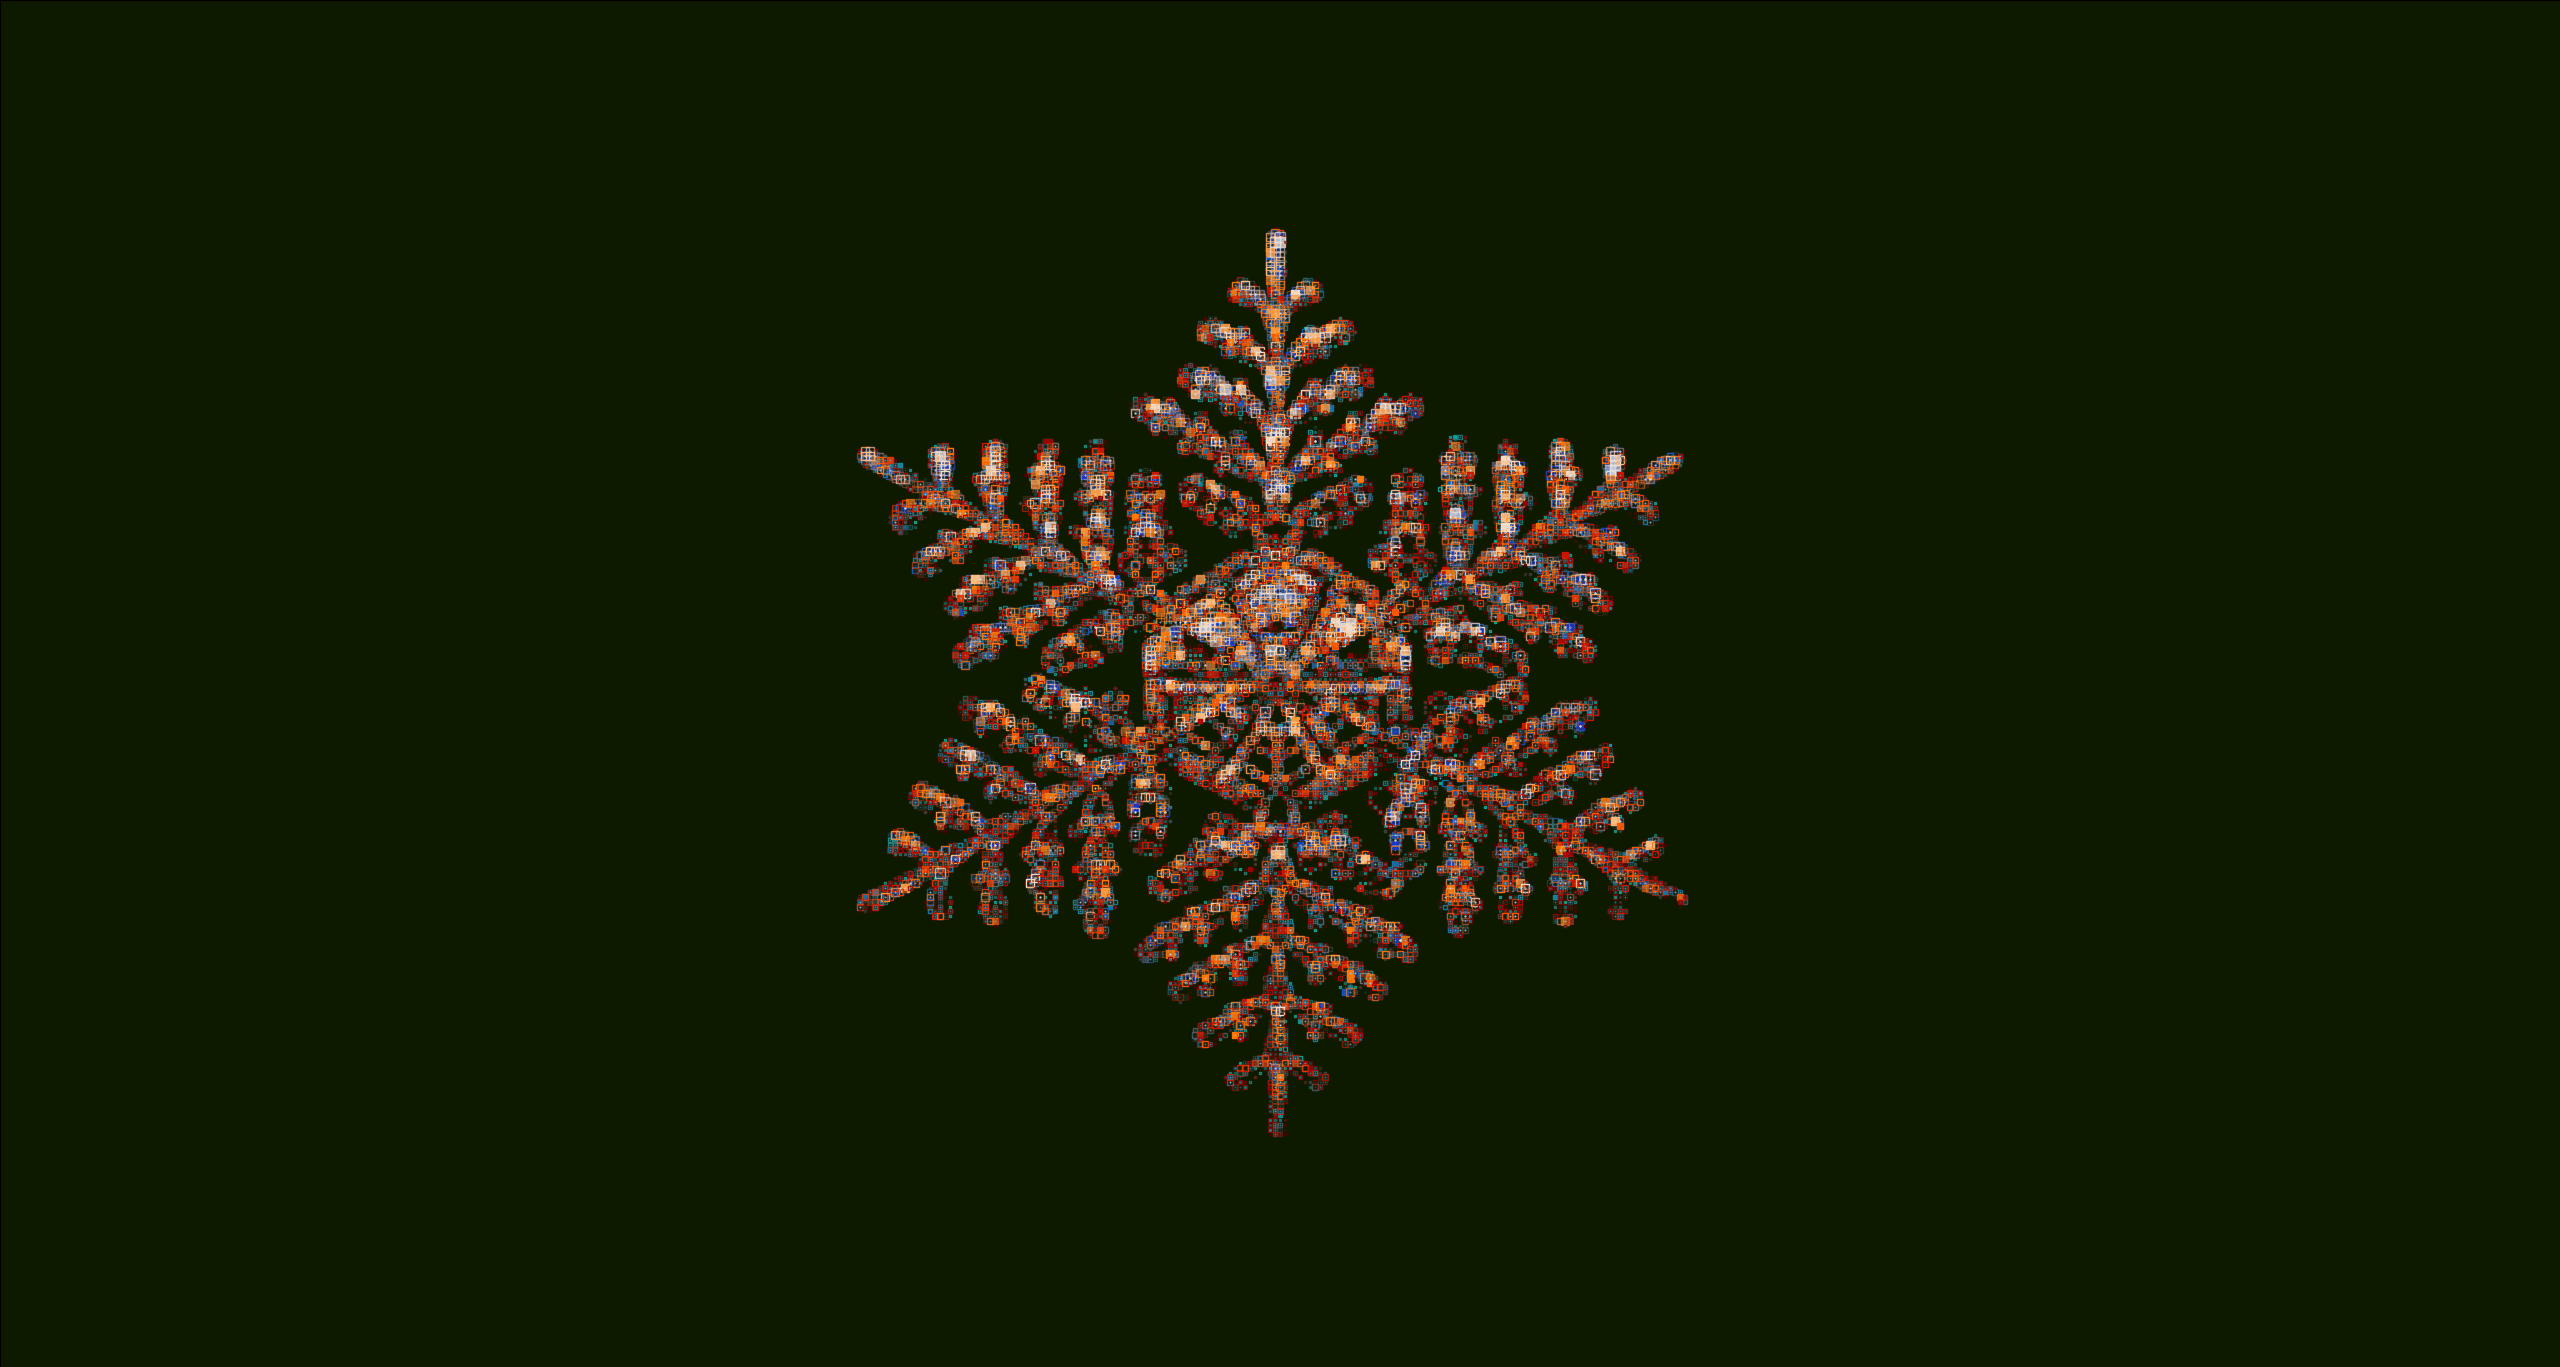 A gold star with red and green crystals - Snowflake